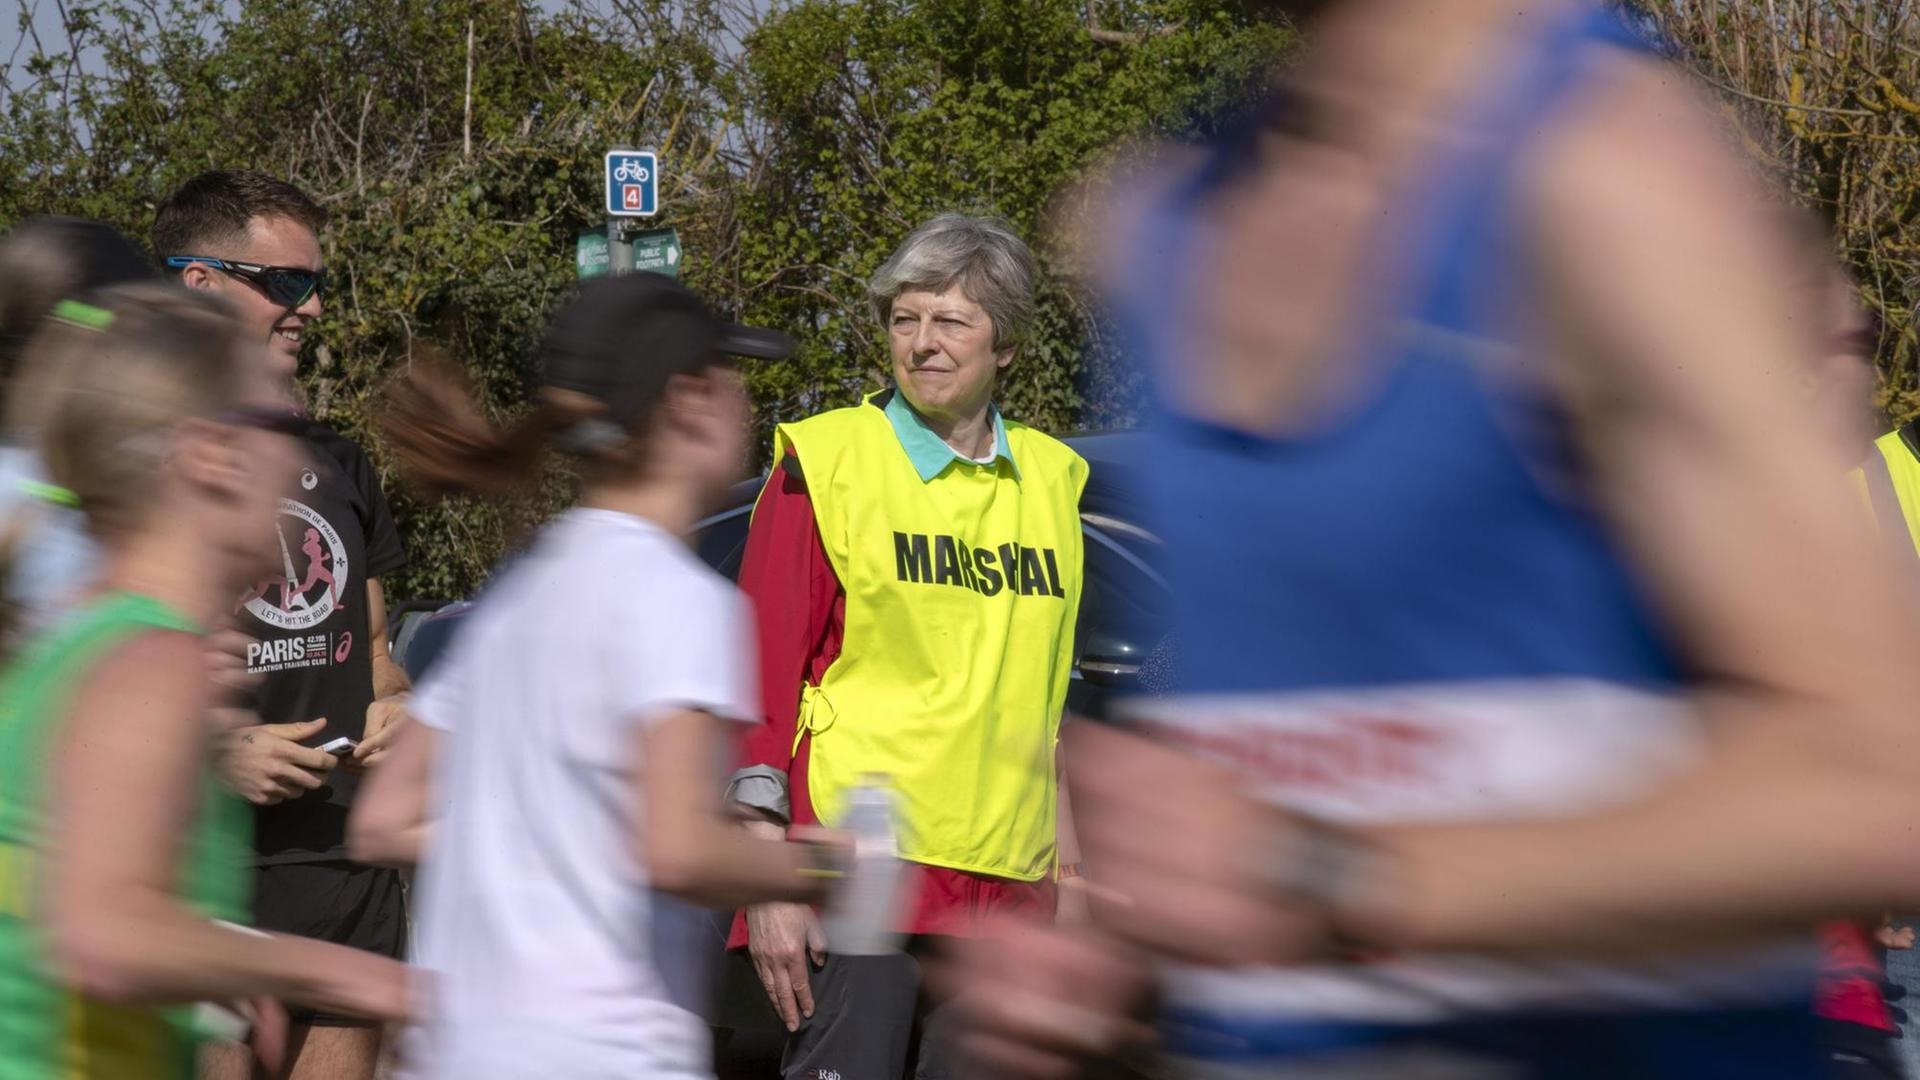 Theresa May at the Maidenhead Easter 10. Prime Minister Theresa May acts as a marshal during the Maidenhead Easter 10 race in maidenhead. Picture date: Friday April 19, 2019. Photo credit should read: Steve Parsons/PA Wire URN:42407796 |